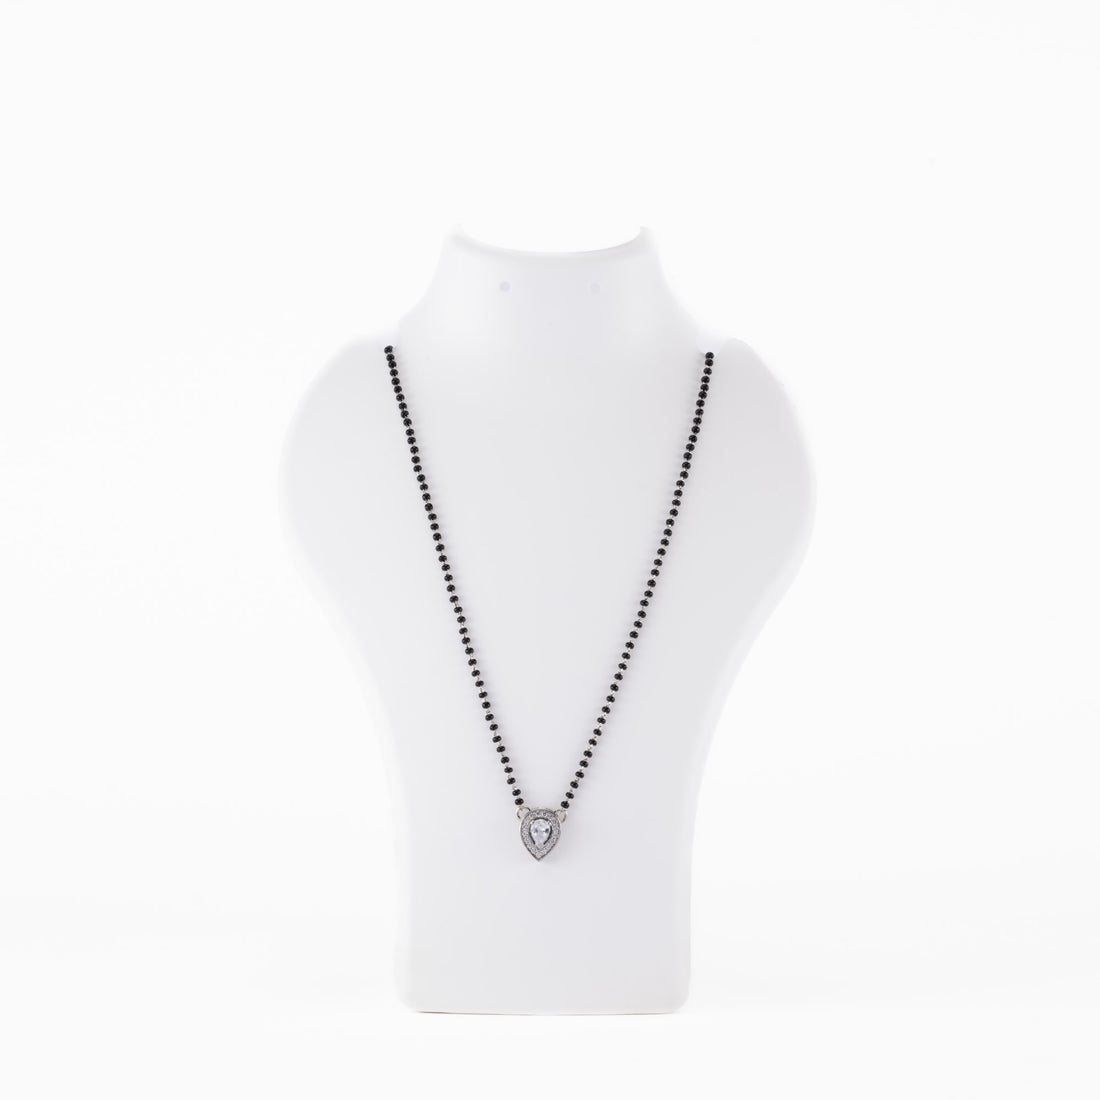 SOLITAIRE CONE SHAPE MANGALSUTRA IN SILVER 92.5